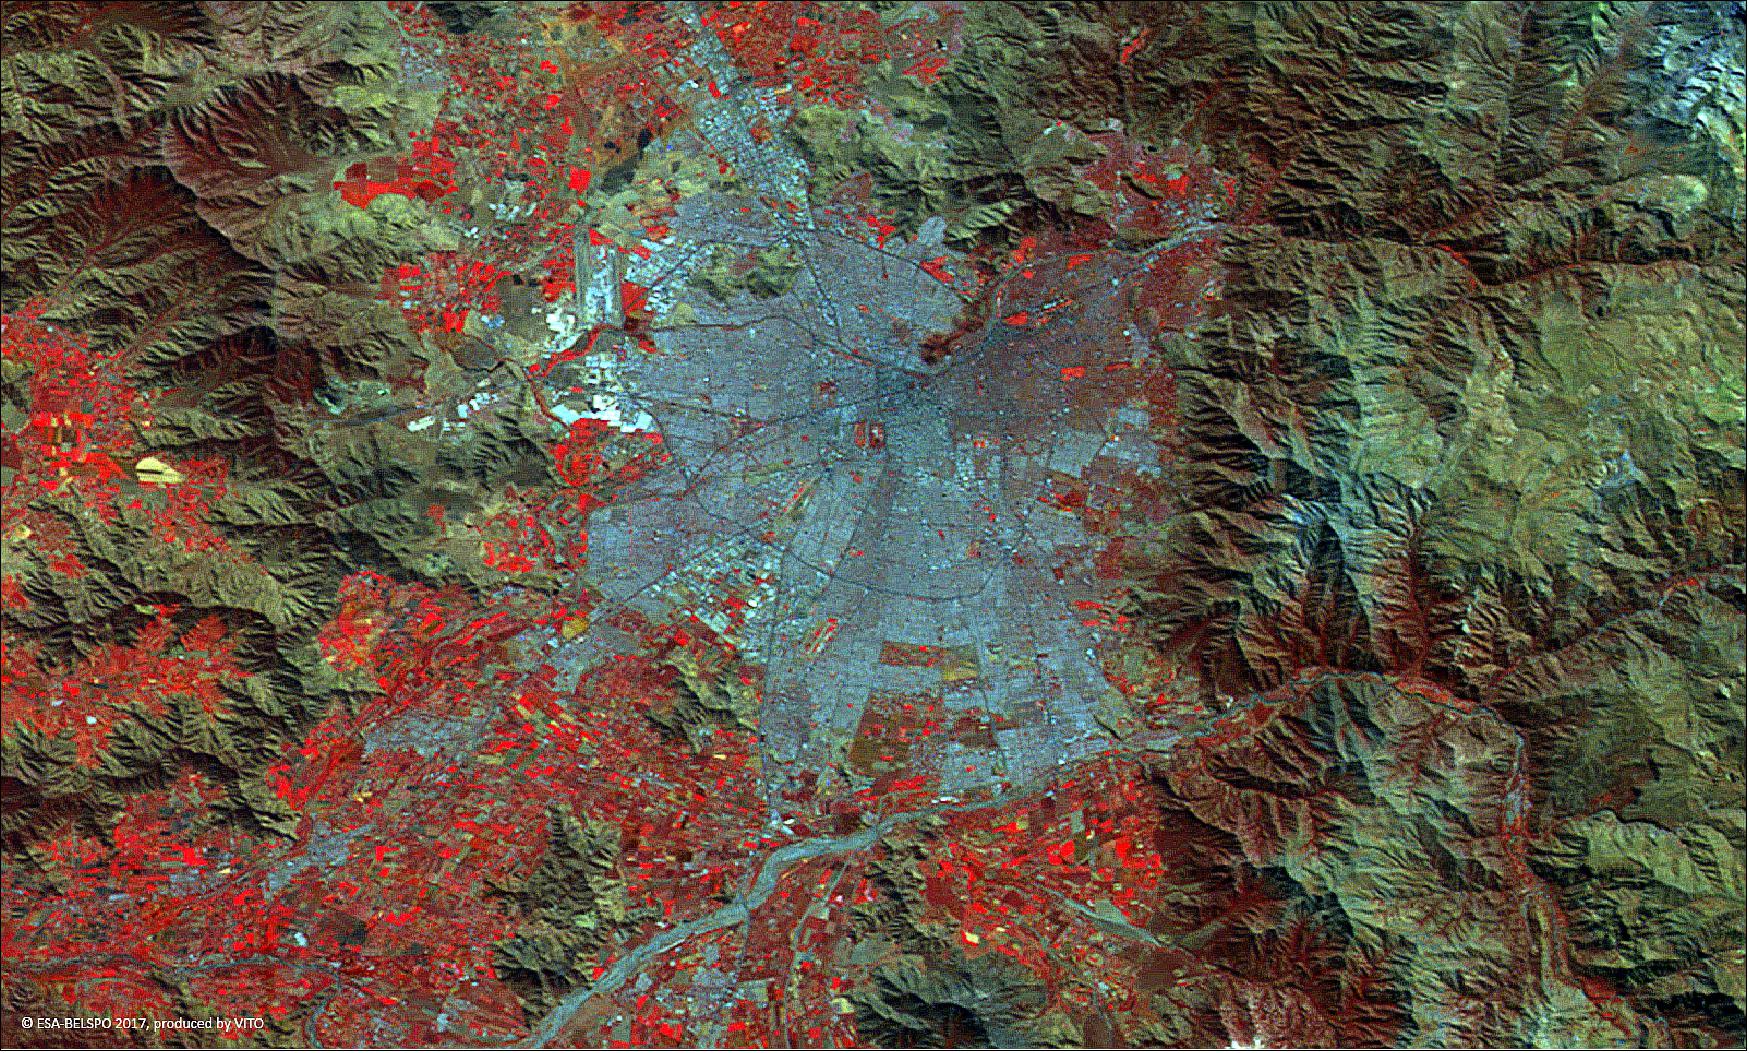 Figure 22: This 100 m spatial resolution image of Santiago de Chile was acquired on 5 April 2017 with PROBA-V (image credit: ESA/Belspo – produced by VITO)